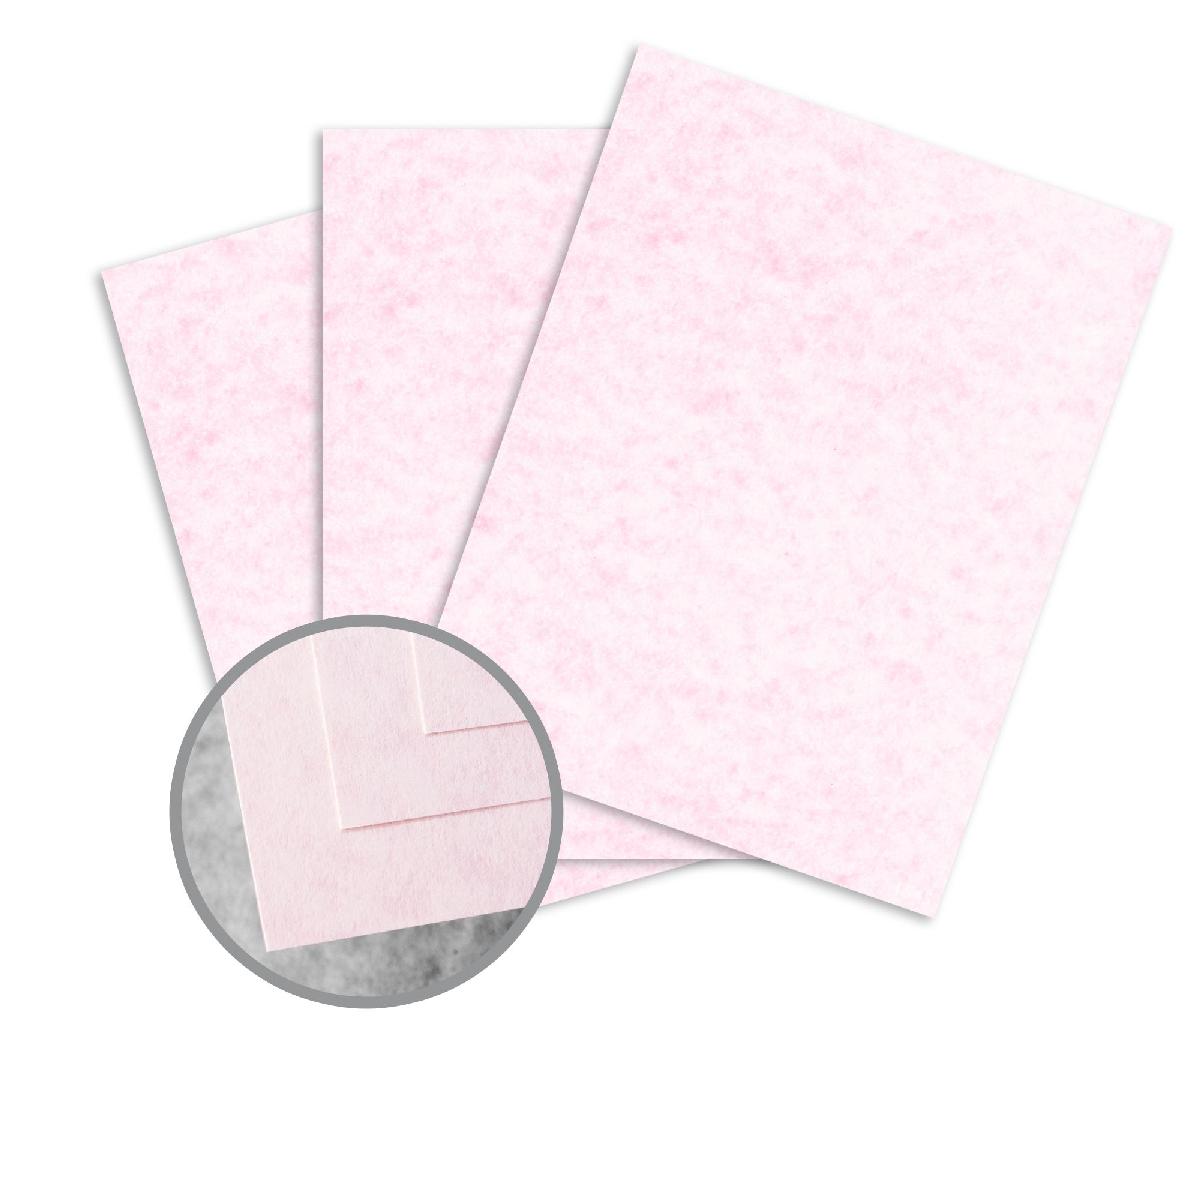 Mohawk® Skytone Pink Ice Vellum 60 lb. Text 8.5x11 in. 500 Sheets per Ream